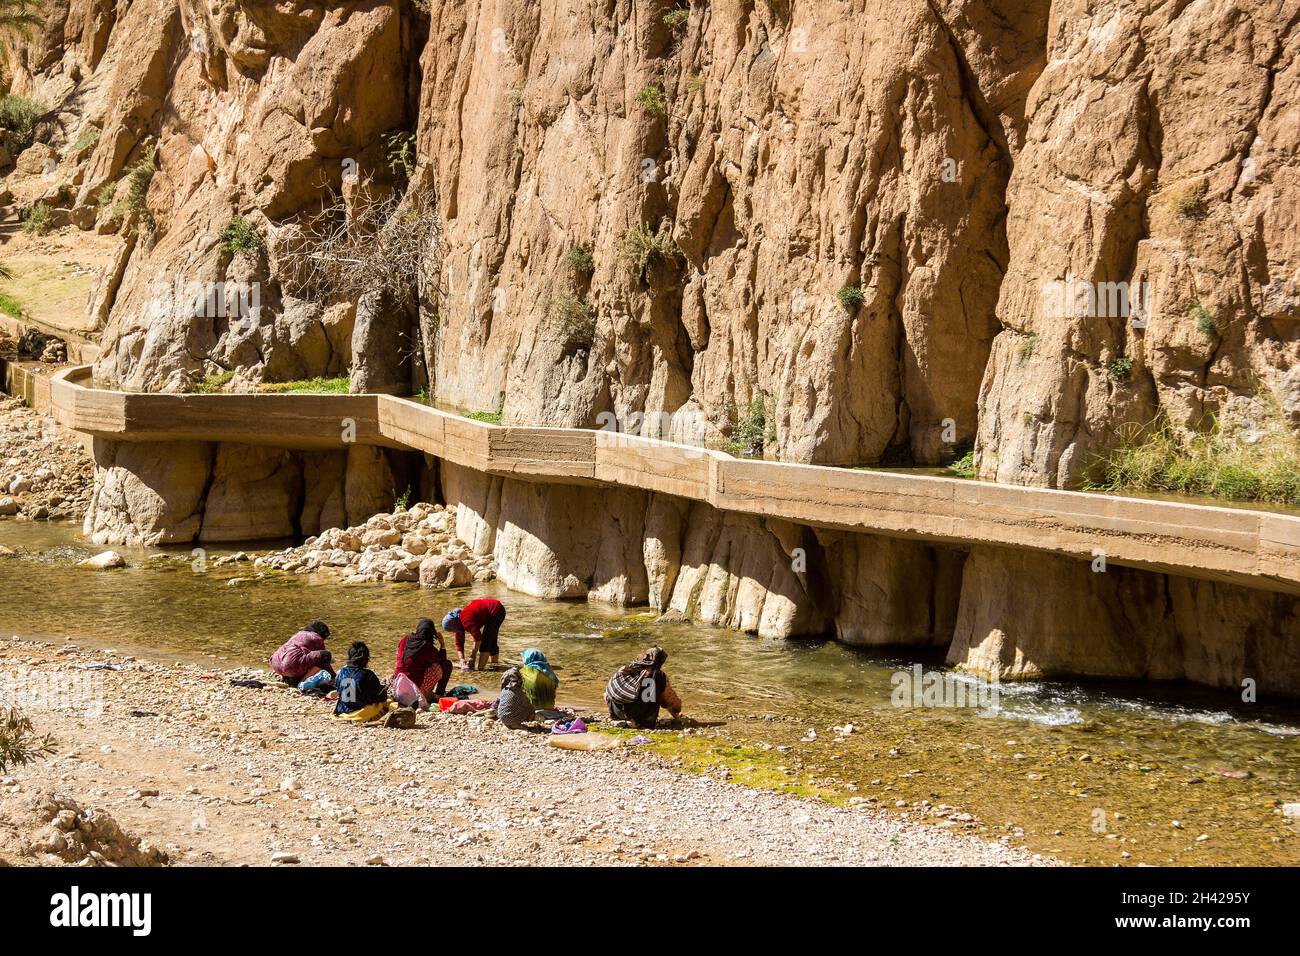 Todra, Morocco - February 25, 2019: Women with children (unidentifiable) in colorful costumes are doing laundry at the river side in the famous Todra Stock Photo